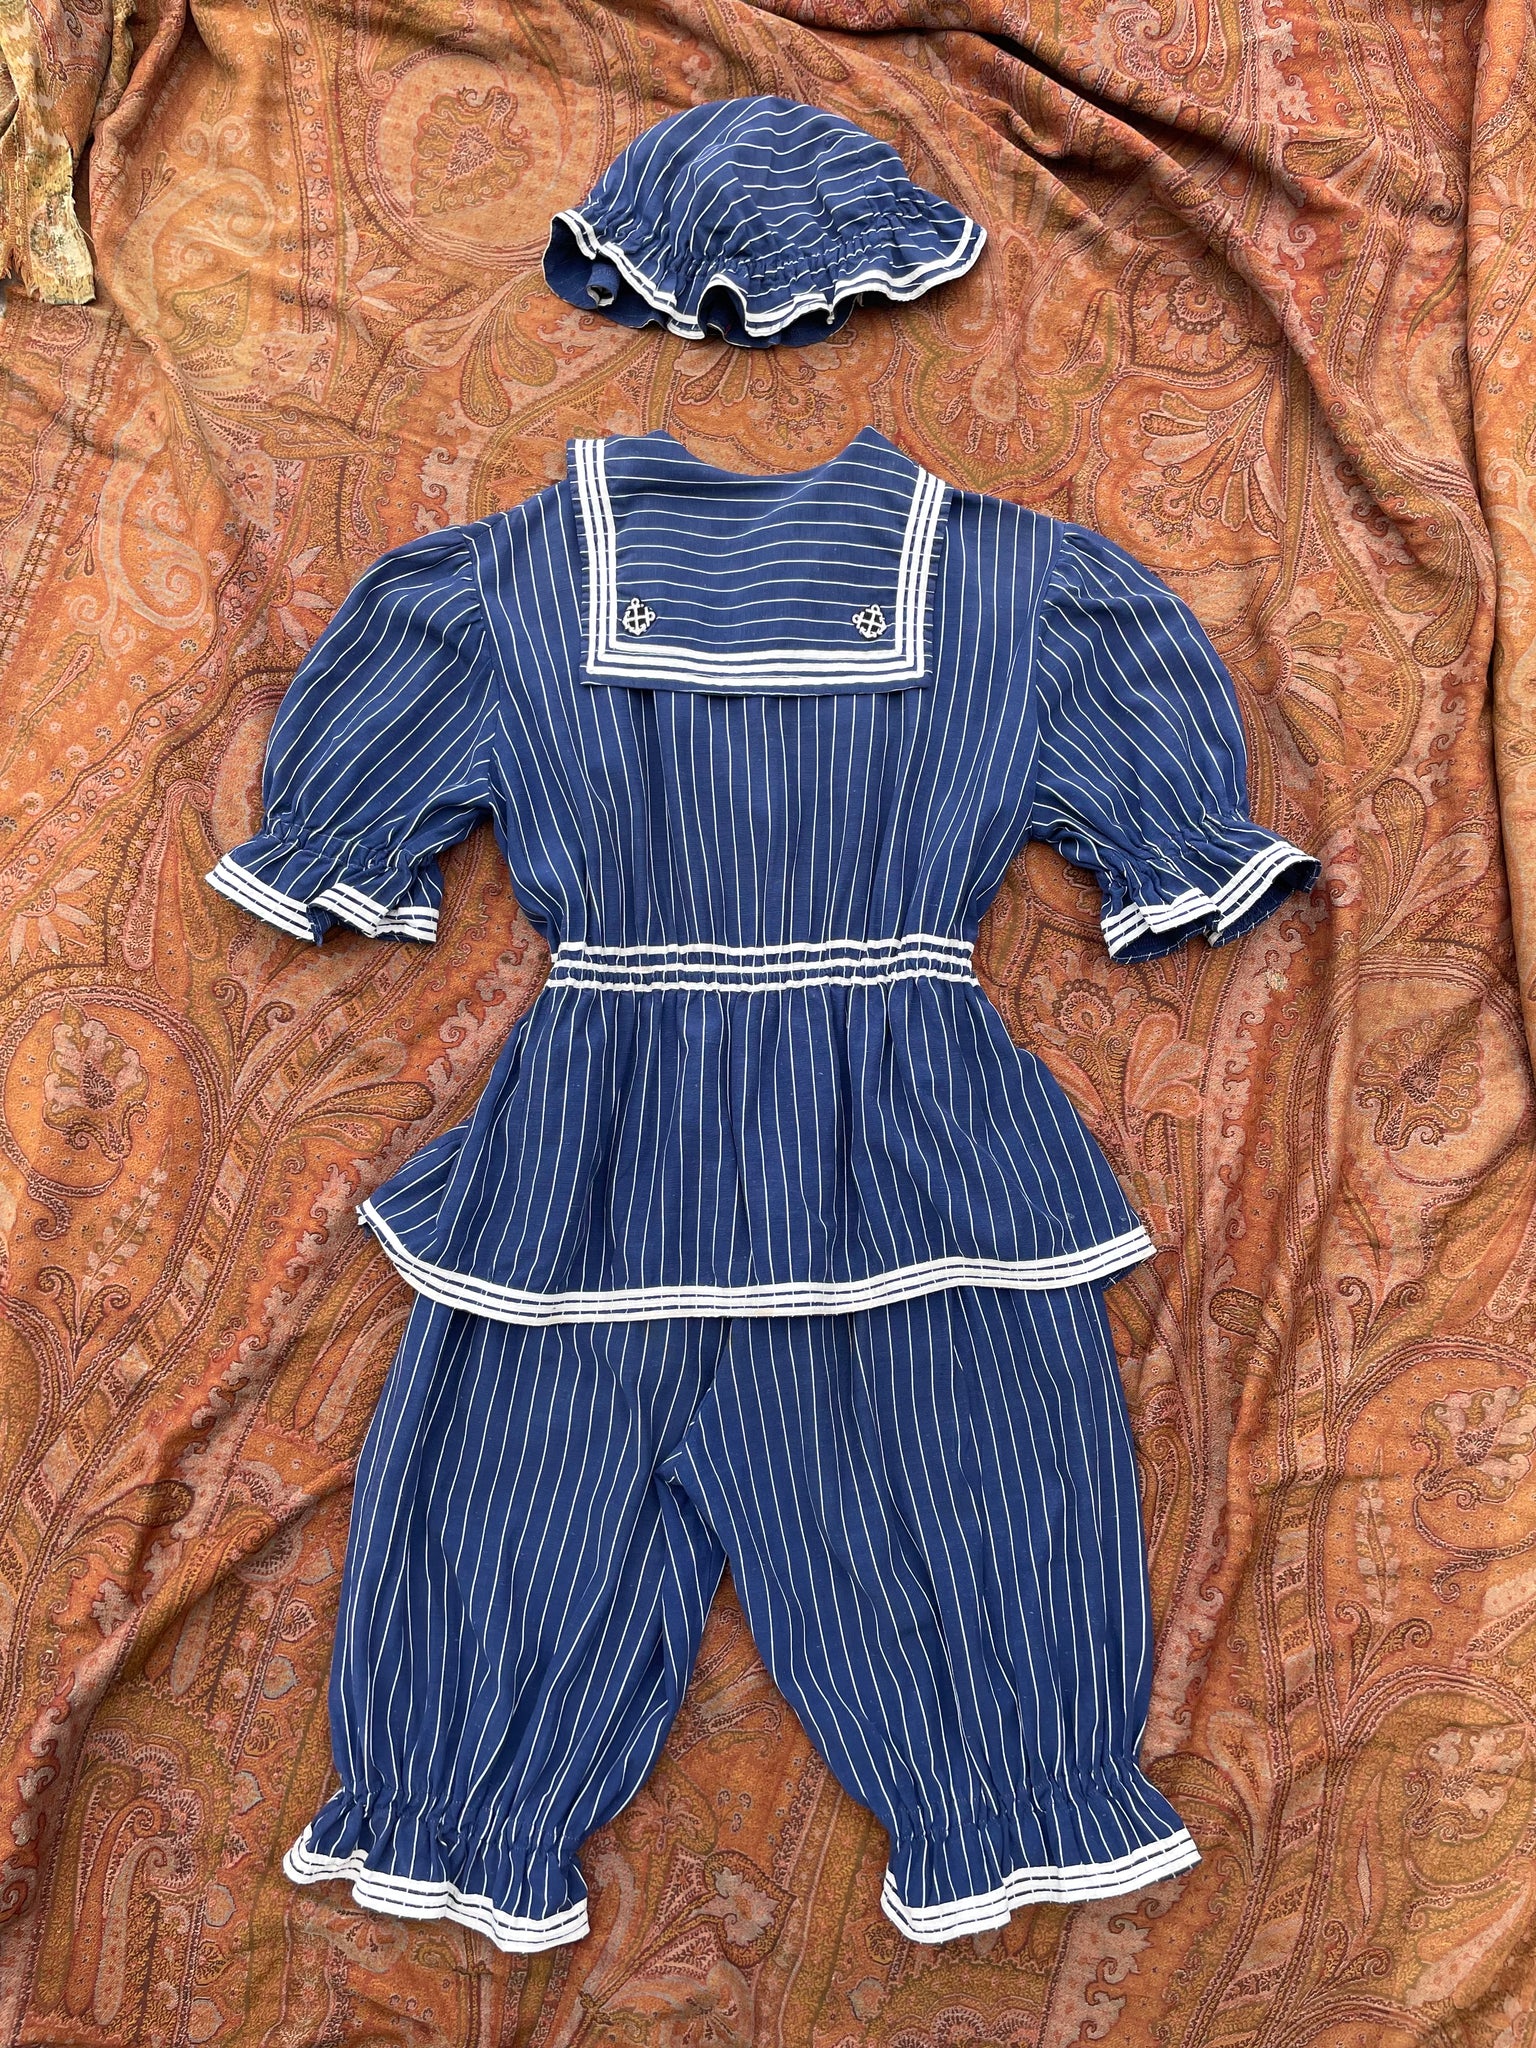 Late 1800s Striped Swimsuit Made Circa 1930s-2 Piece Jumpsuit + Hat